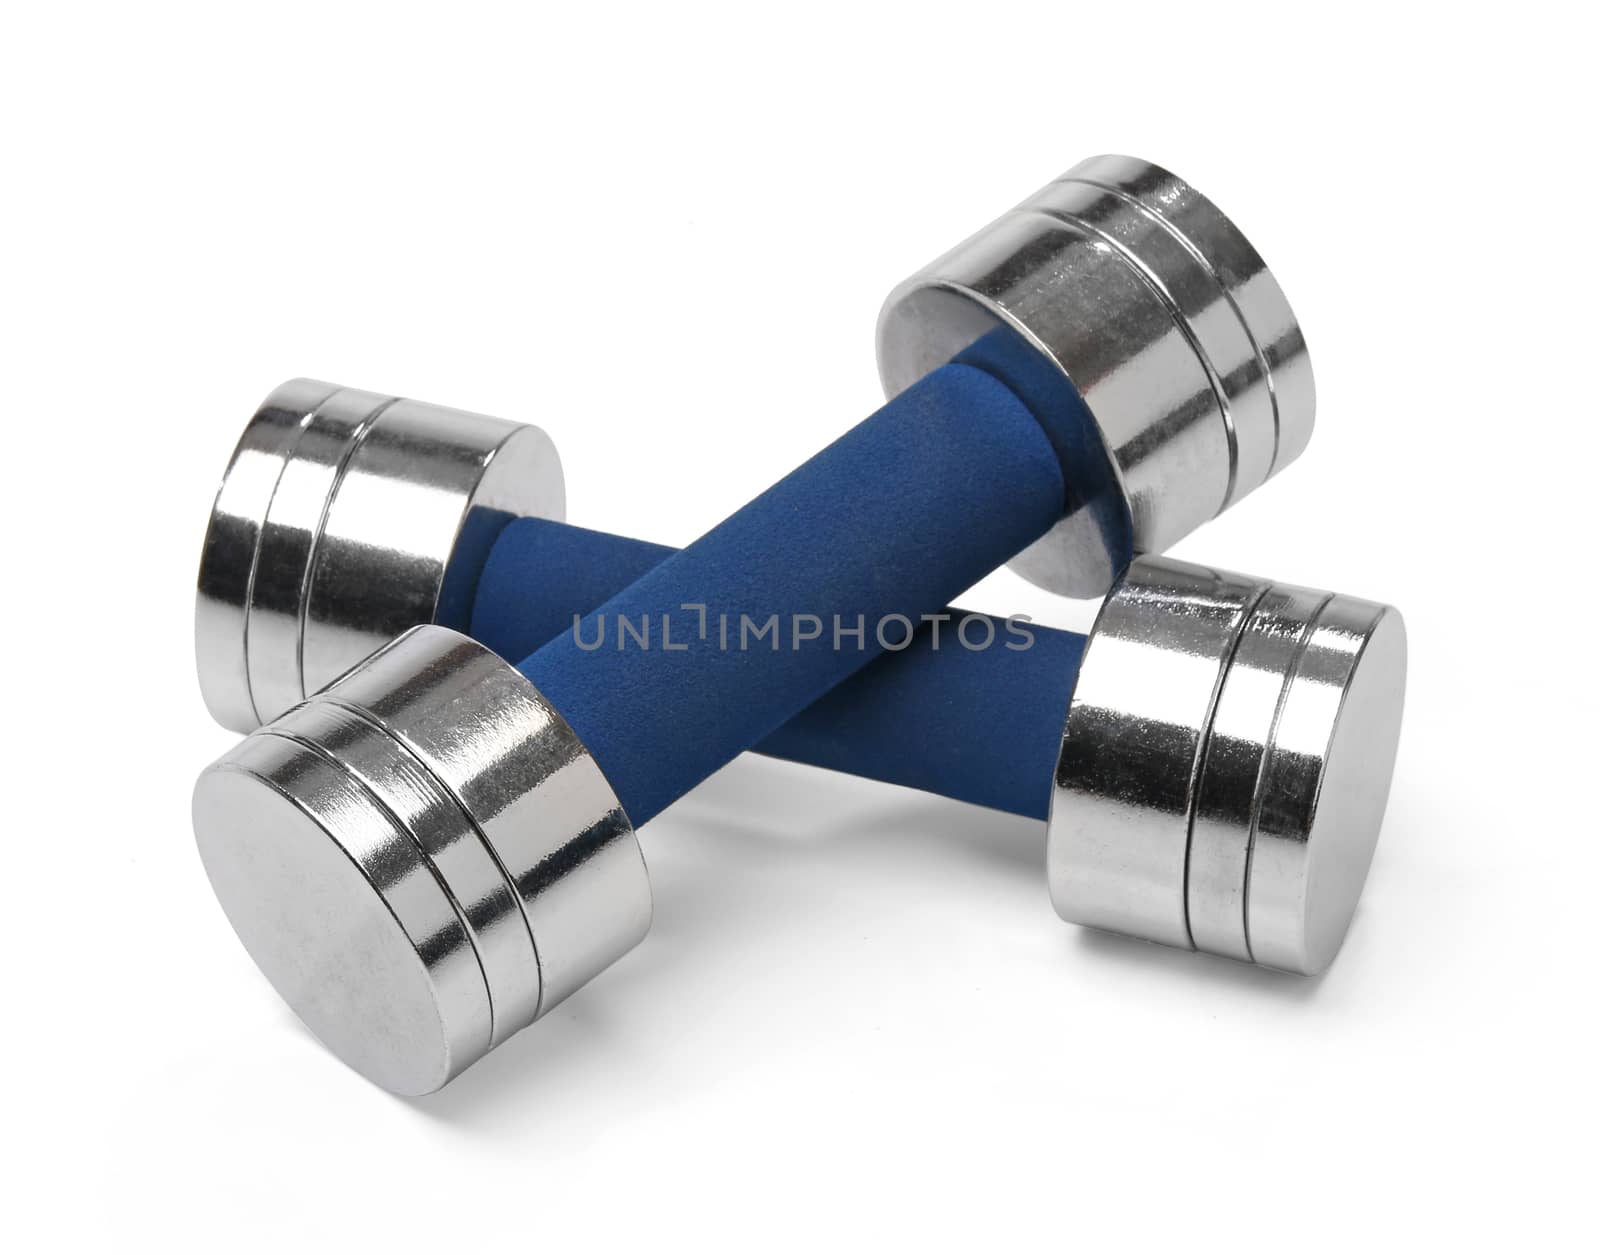 Pair of dumbbells isolated by Erdosain